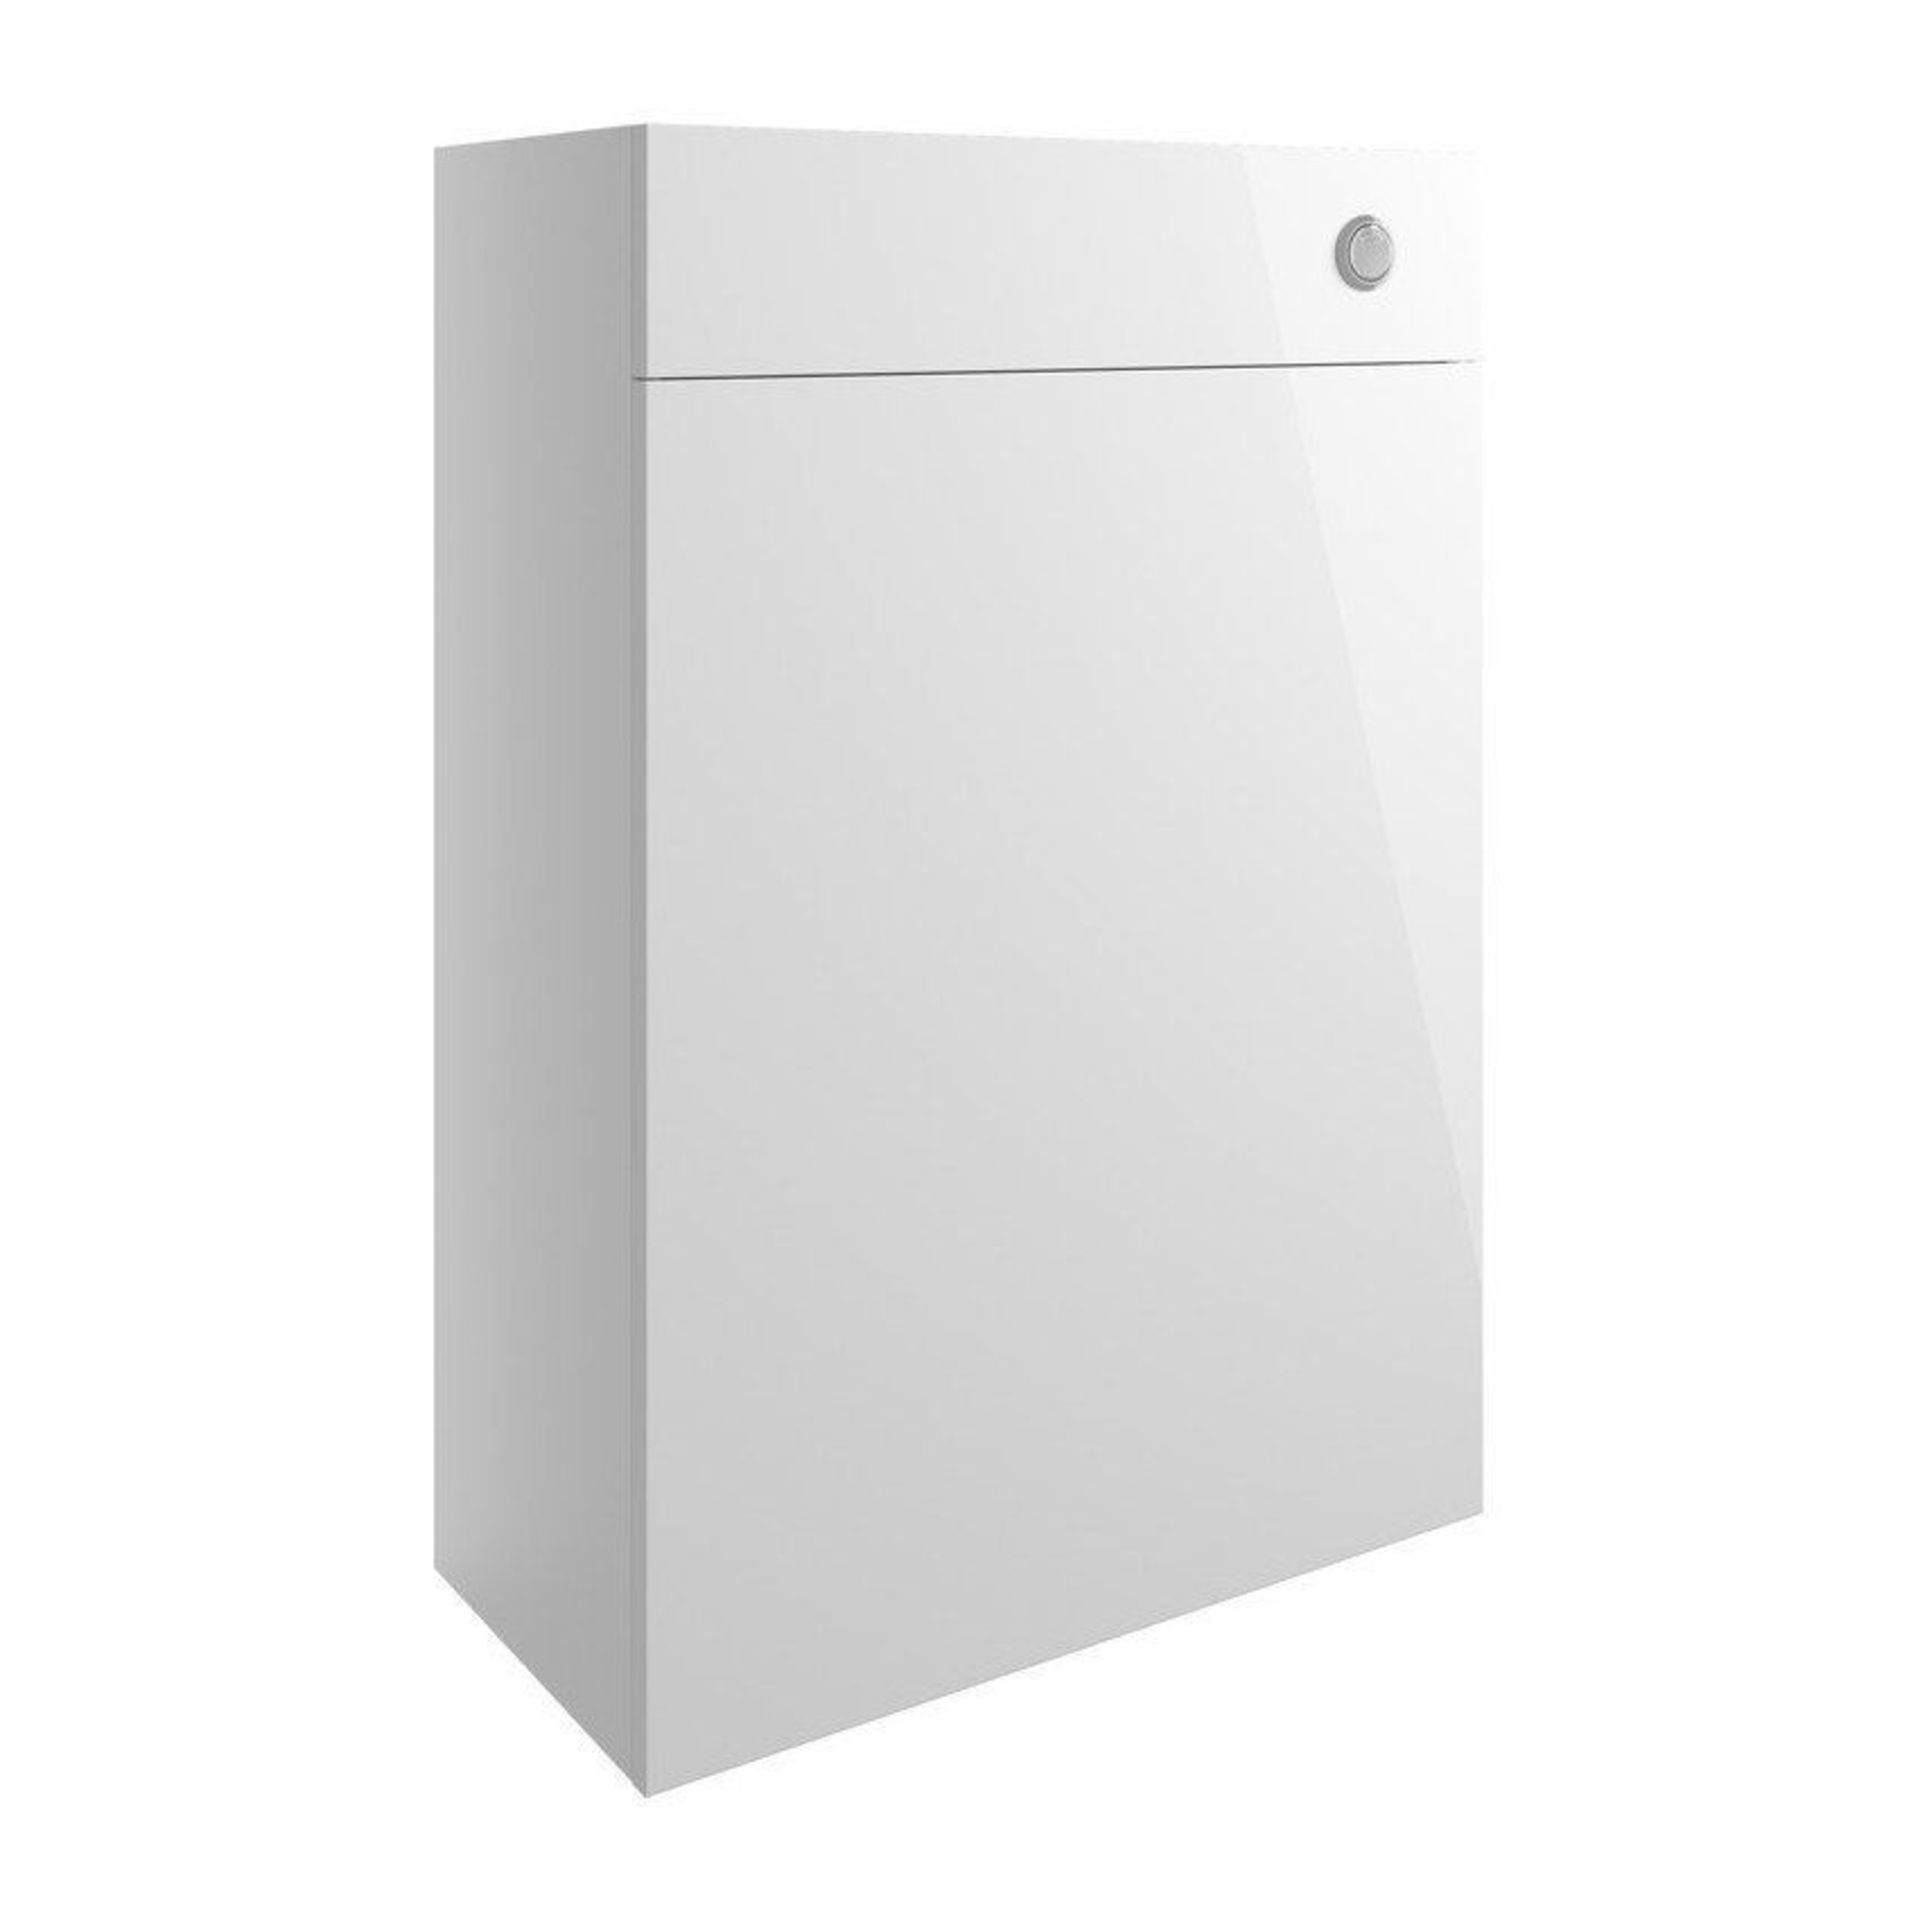 New (K109) Valesso 600mm Full Depth WC Unit - White Gloss. Pre-Assembled _ Durable 18mm Cab...